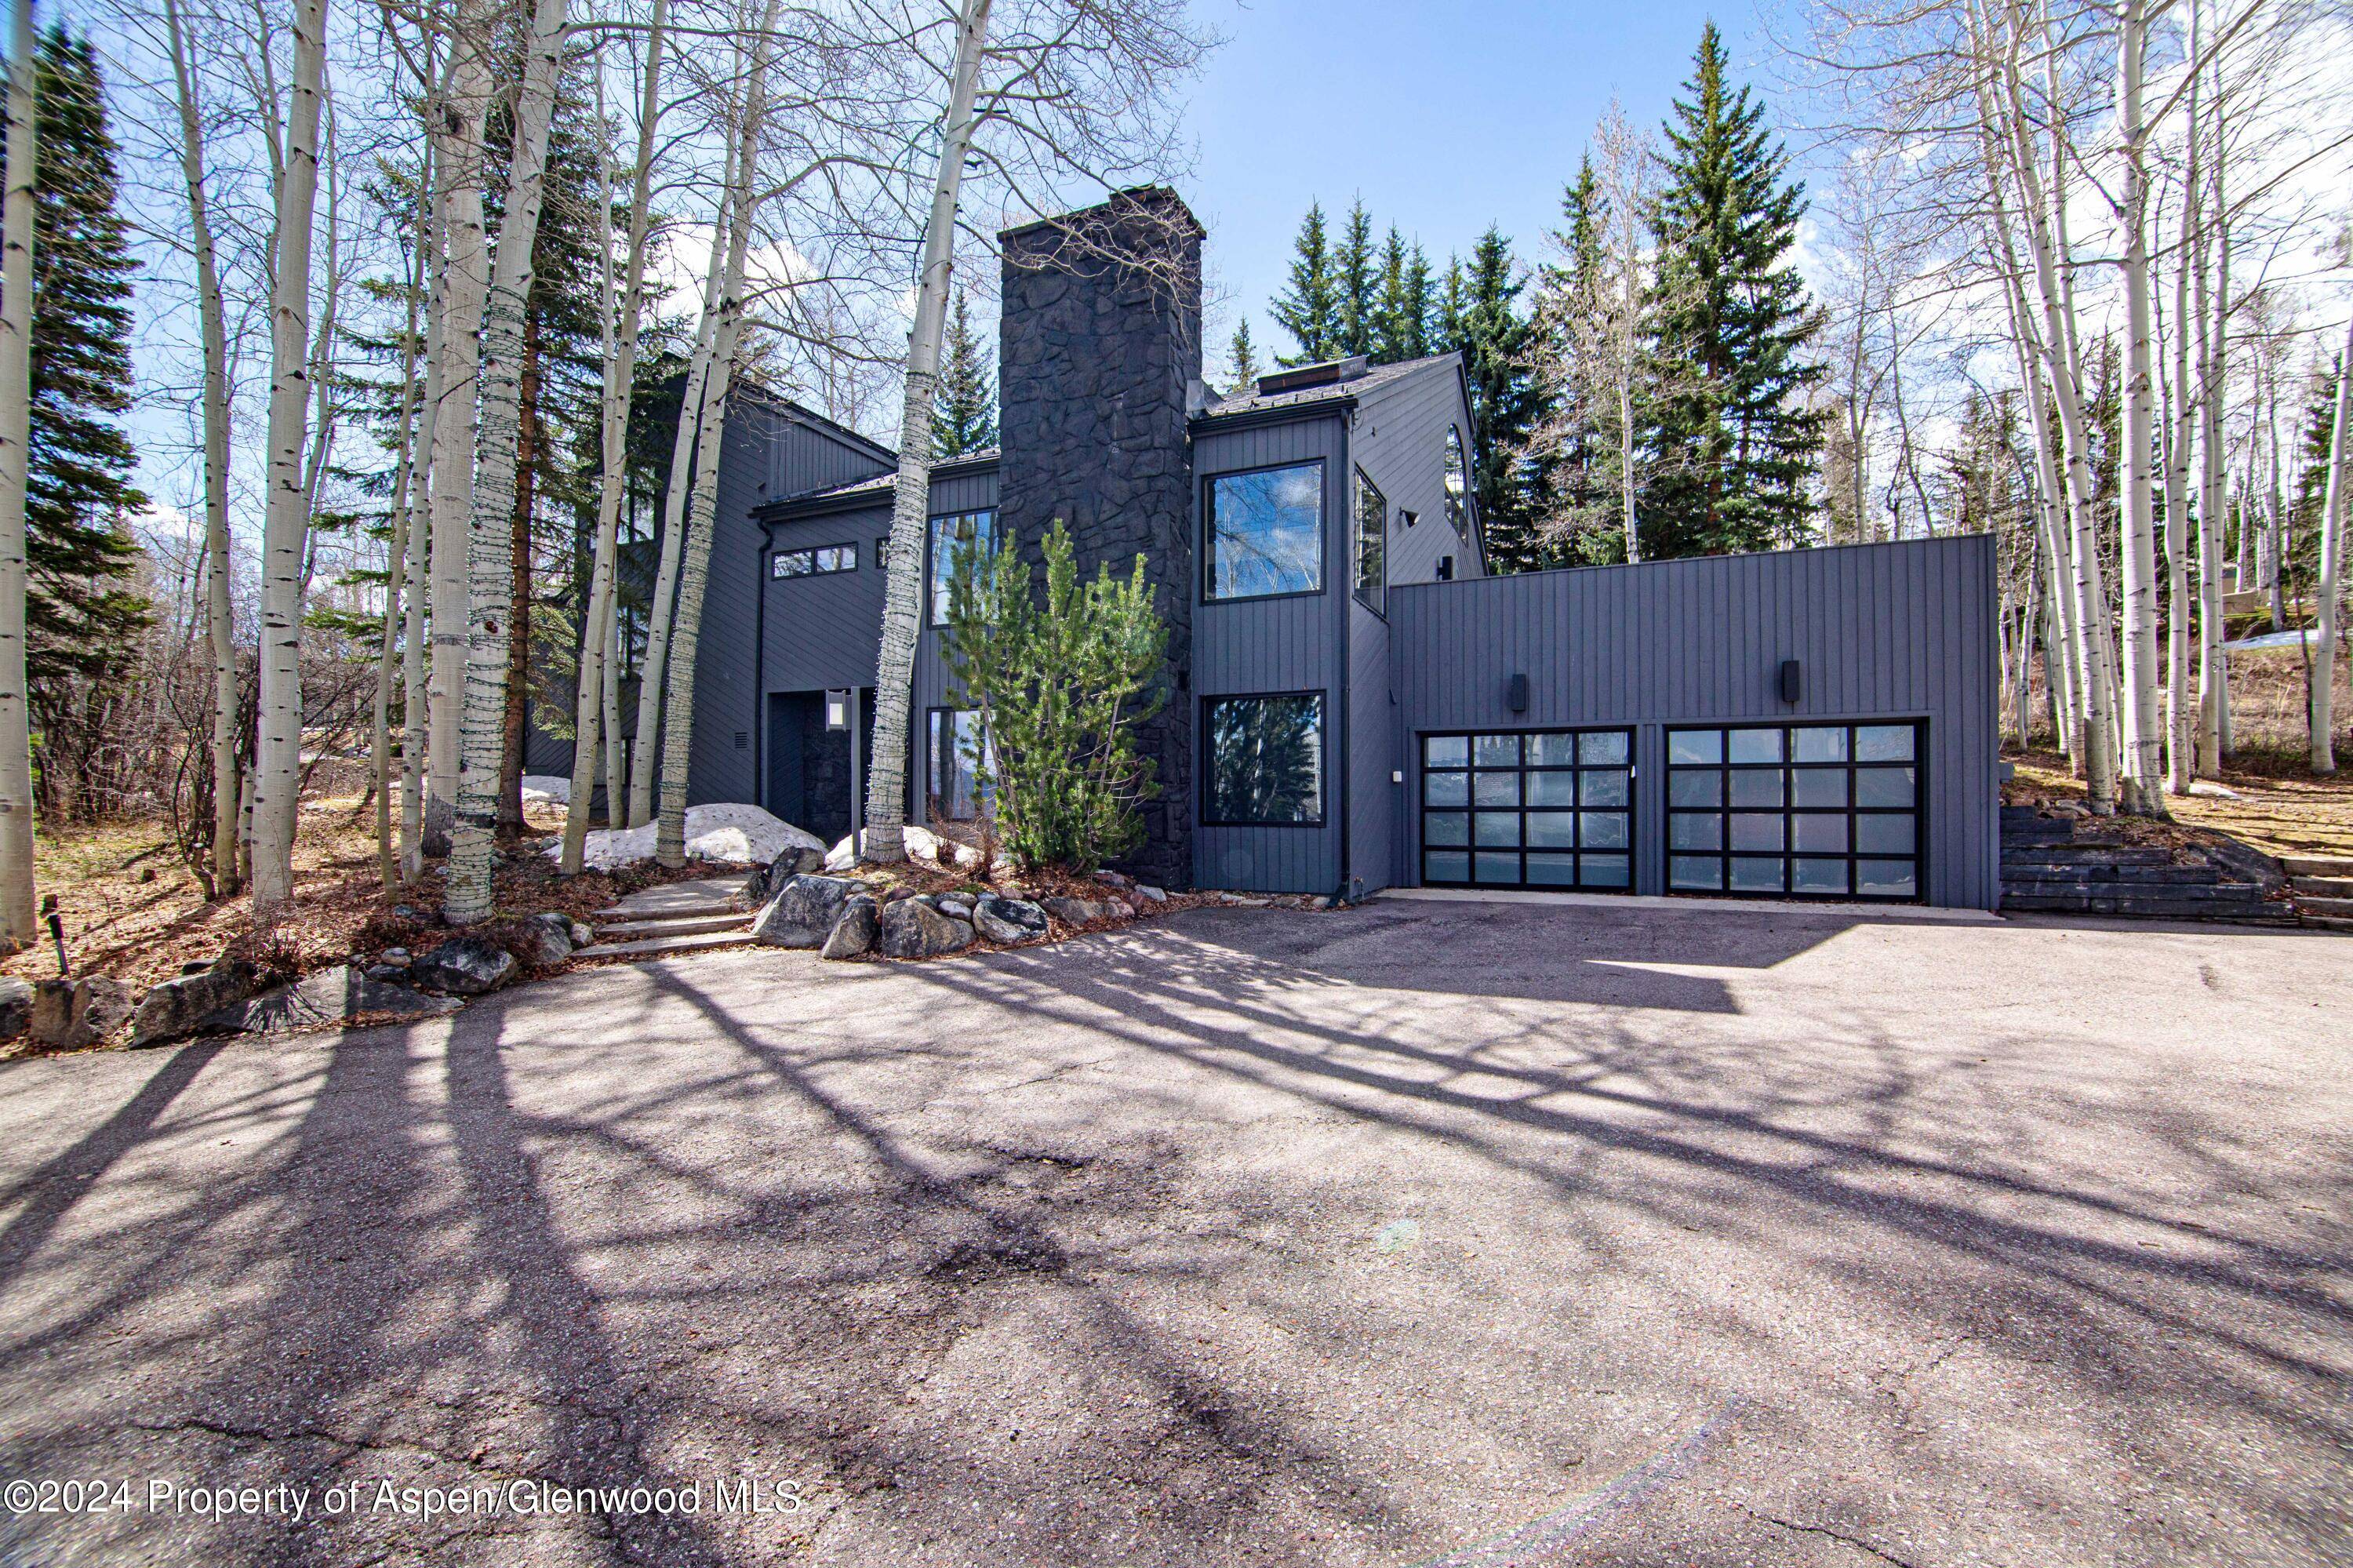 This beautifully renovated mountain home is situated on a large lot in one of Snowmass Village's most sought after neighborhoods of Ridge Run.